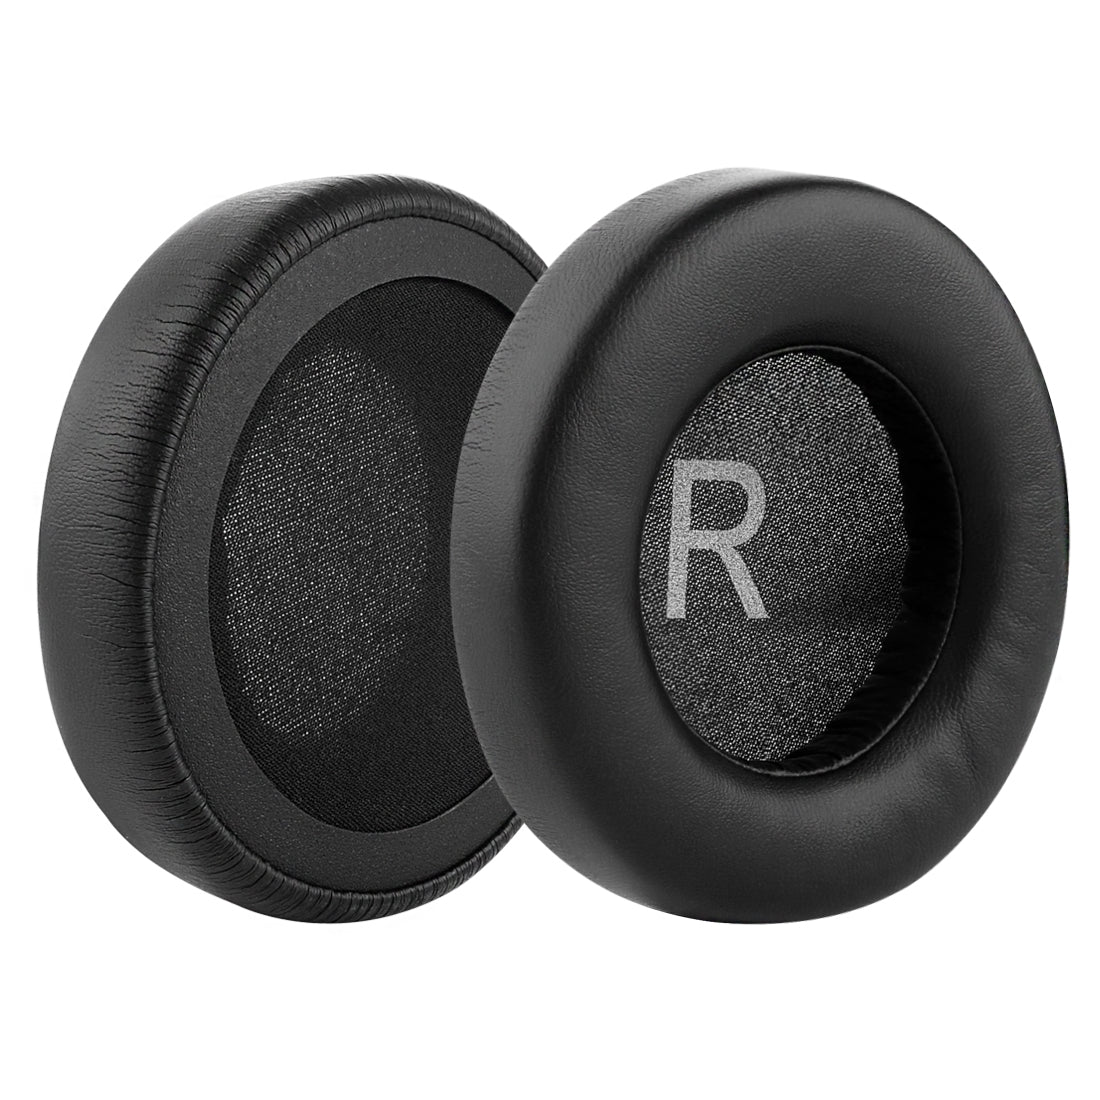 Geekria QuickFit Replacement Ear Pads for AKG K845BT, K845, K545, K540